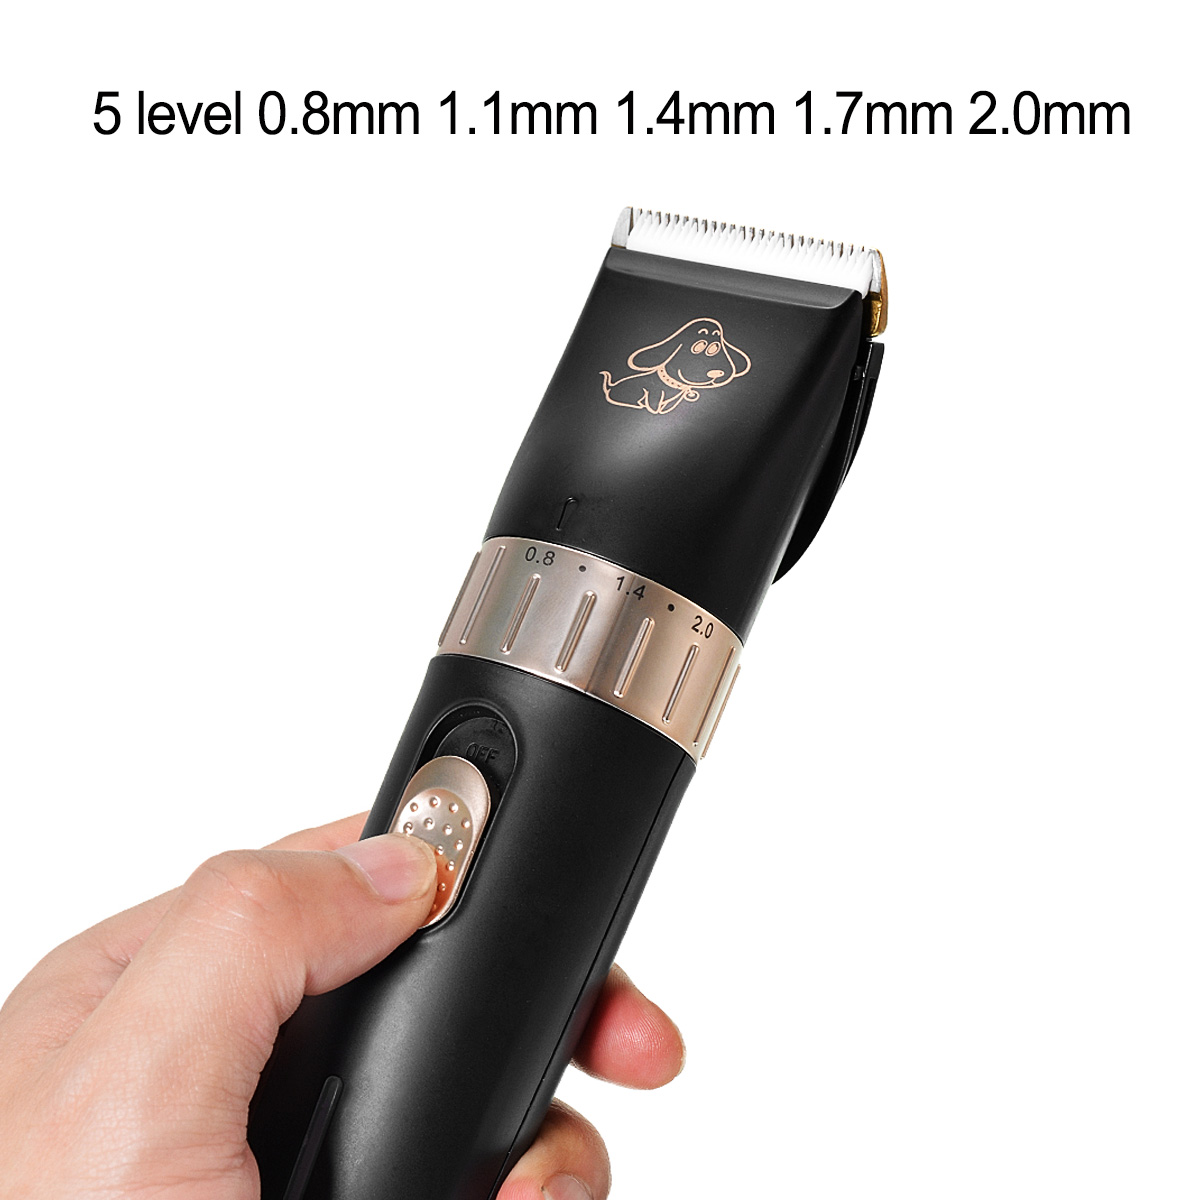 Pet-Grooming-ClippersFocuspet-2-level-speed-adjustable-Rechargeable-Cordless-Dog-Grooming-Clippers-K-1305146-16